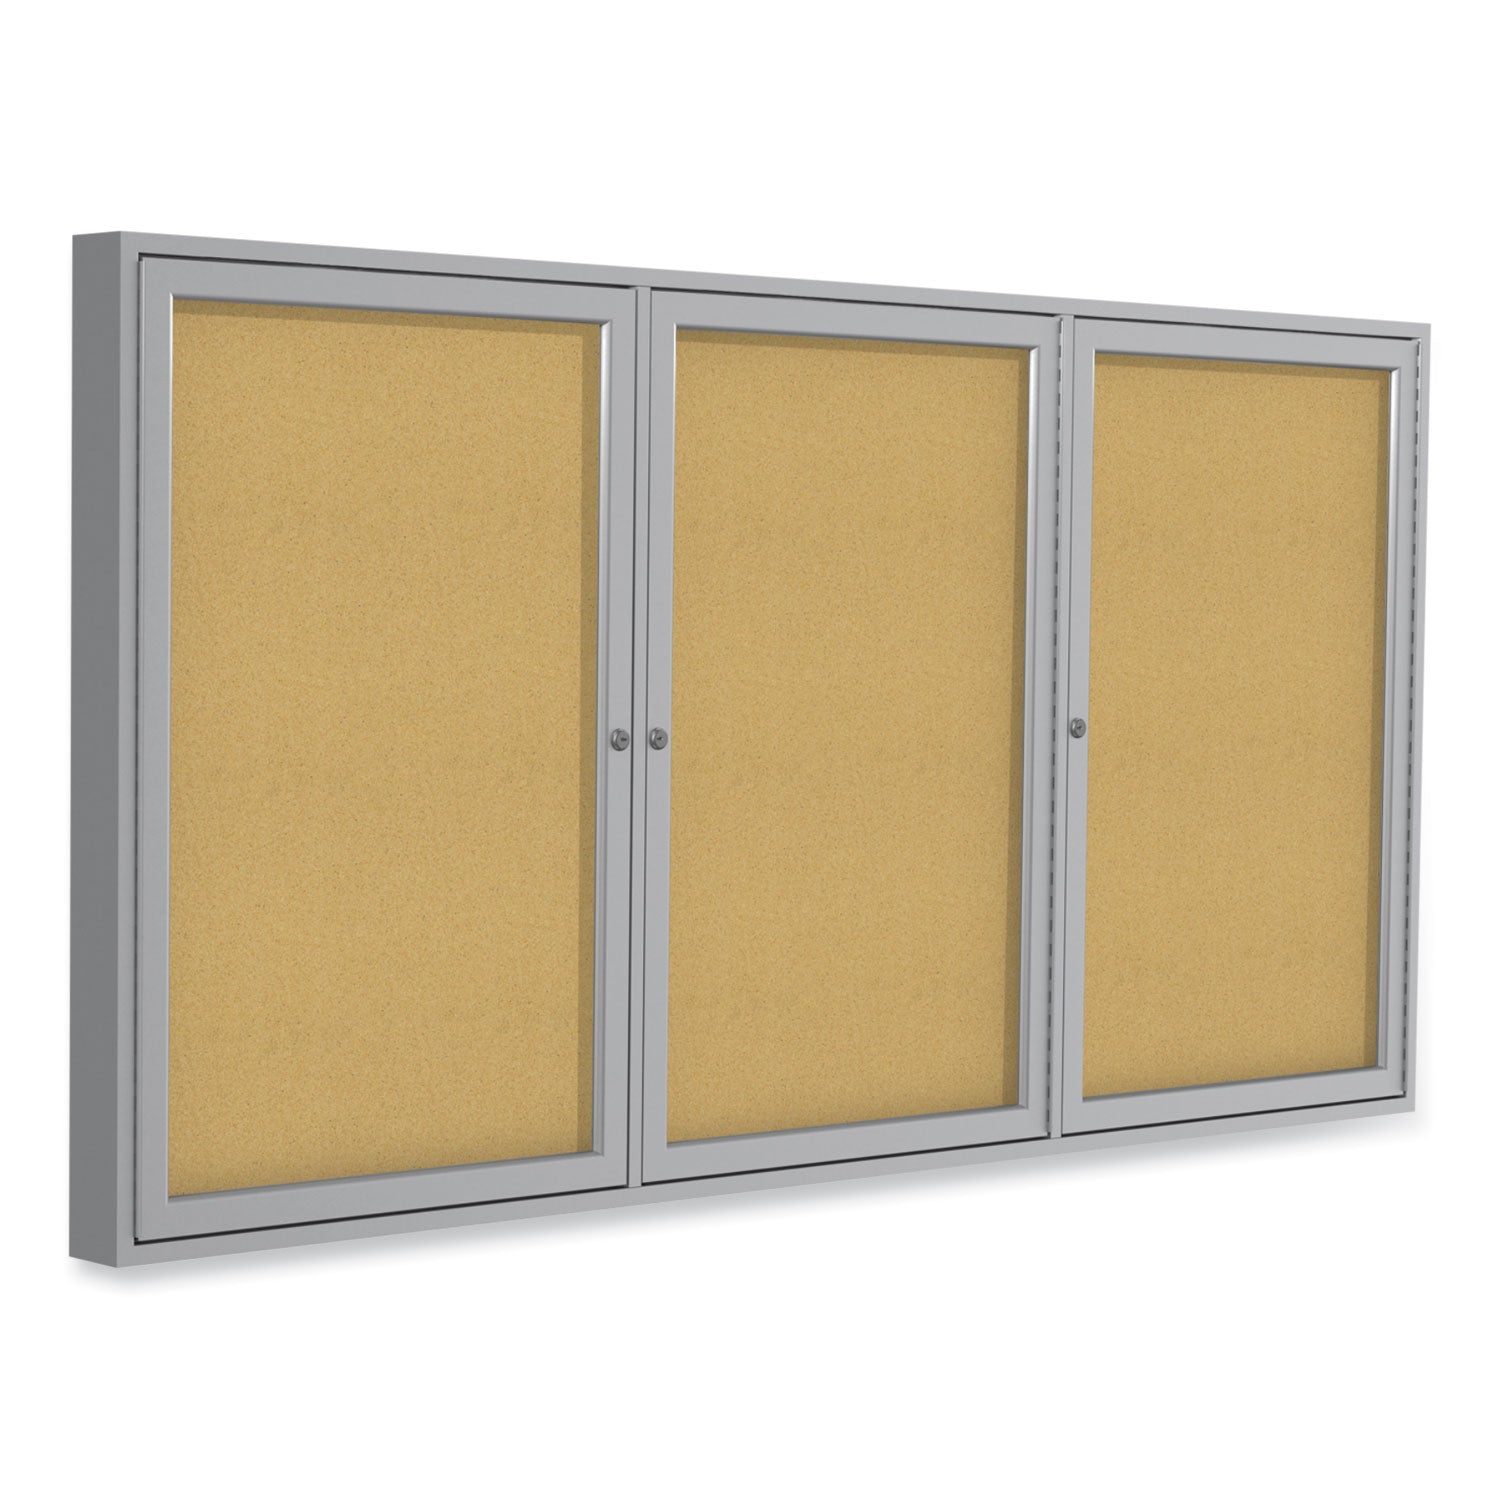 3-door-enclosed-vinyl-bulletin-board-with-satin-aluminum-frame-72-x-48-silver-surface-ships-in-7-10-business-days_ghepa34872vx193 - 1